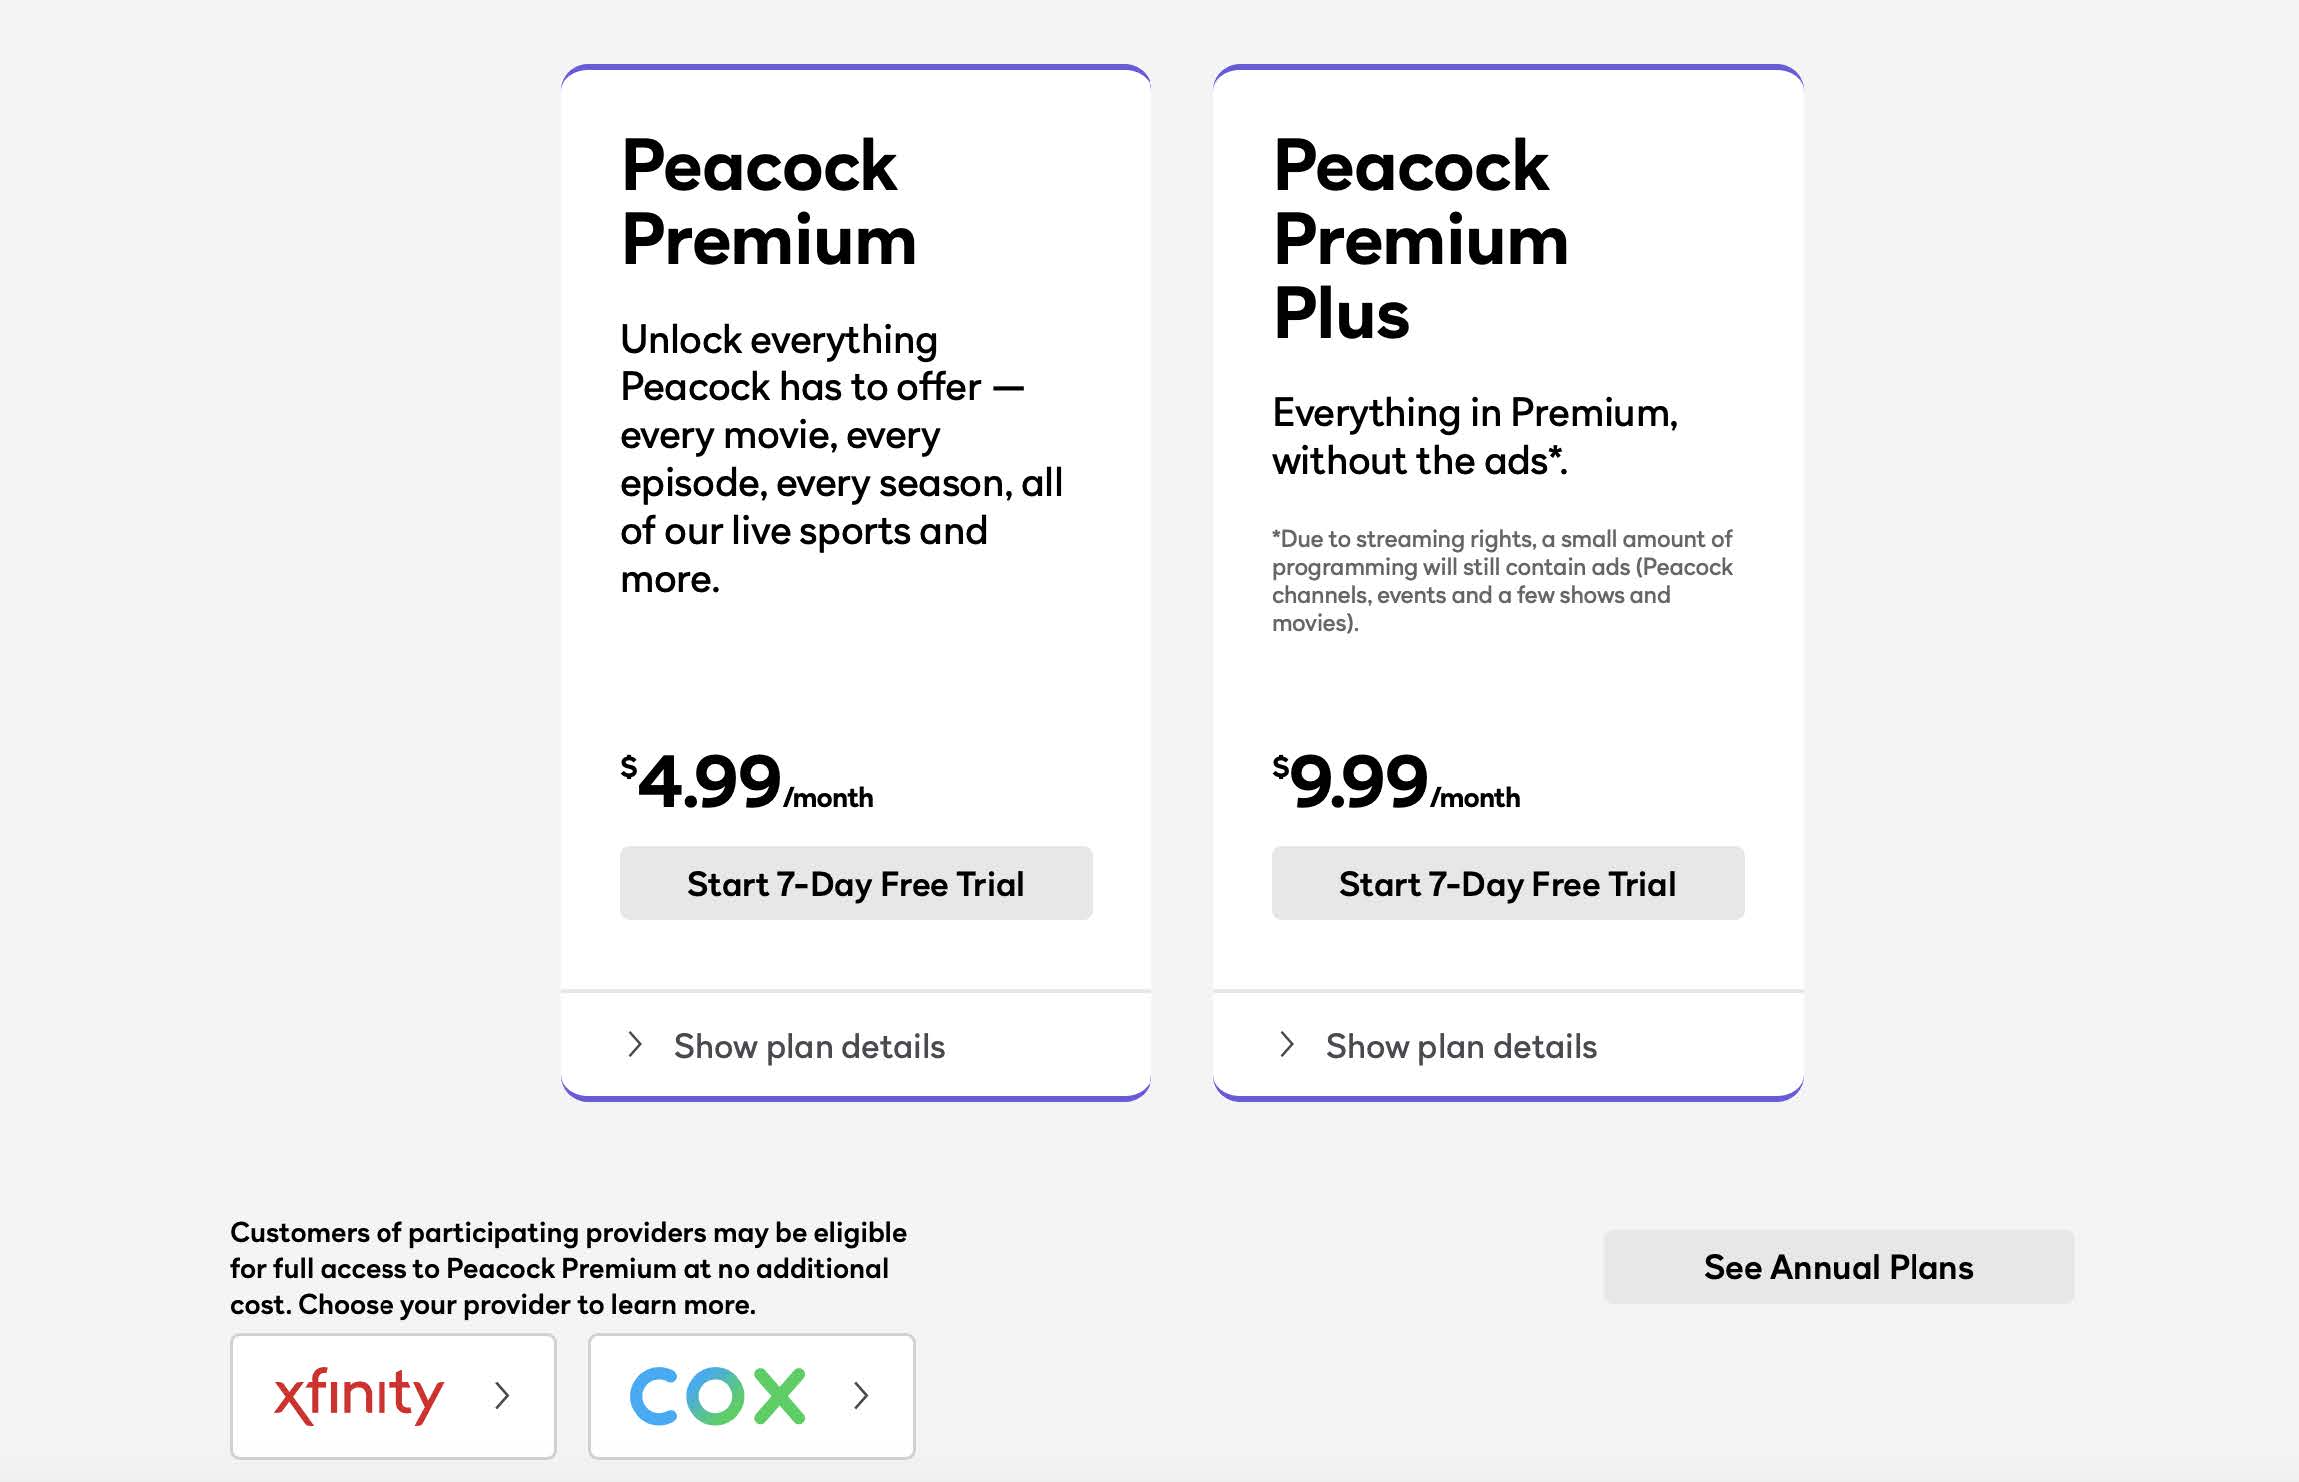 How Much Does Peacock Premium Cost Per Month